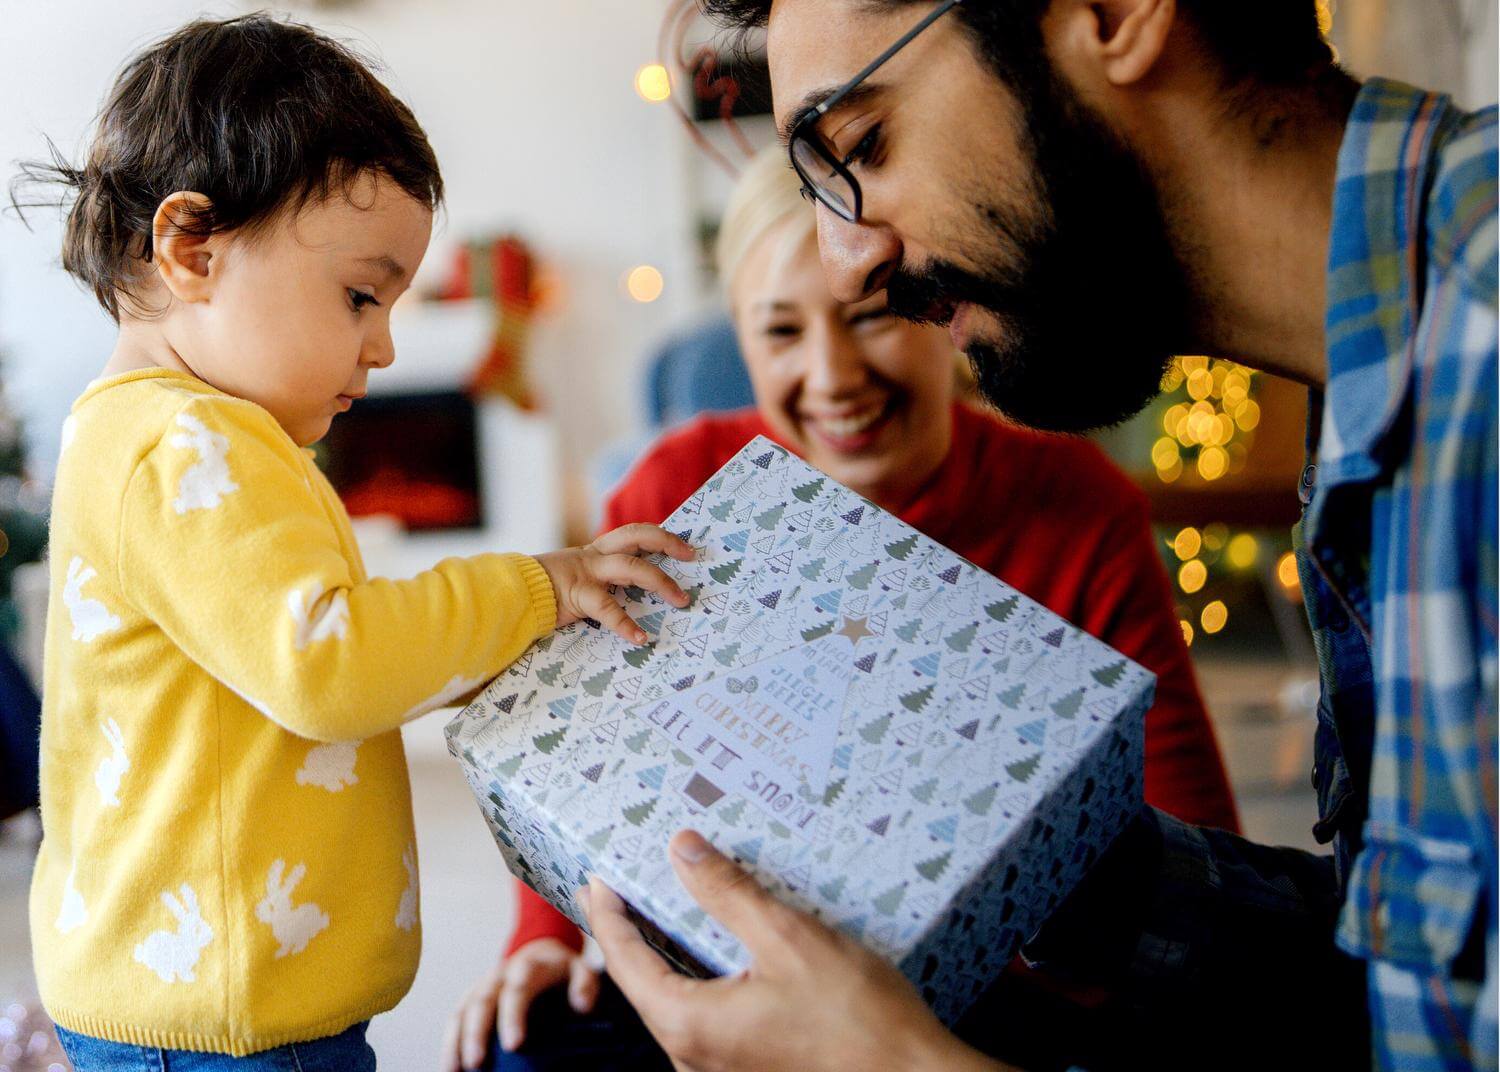 Toddler in a yellow sweater receives wrapped gift from fatherly figure